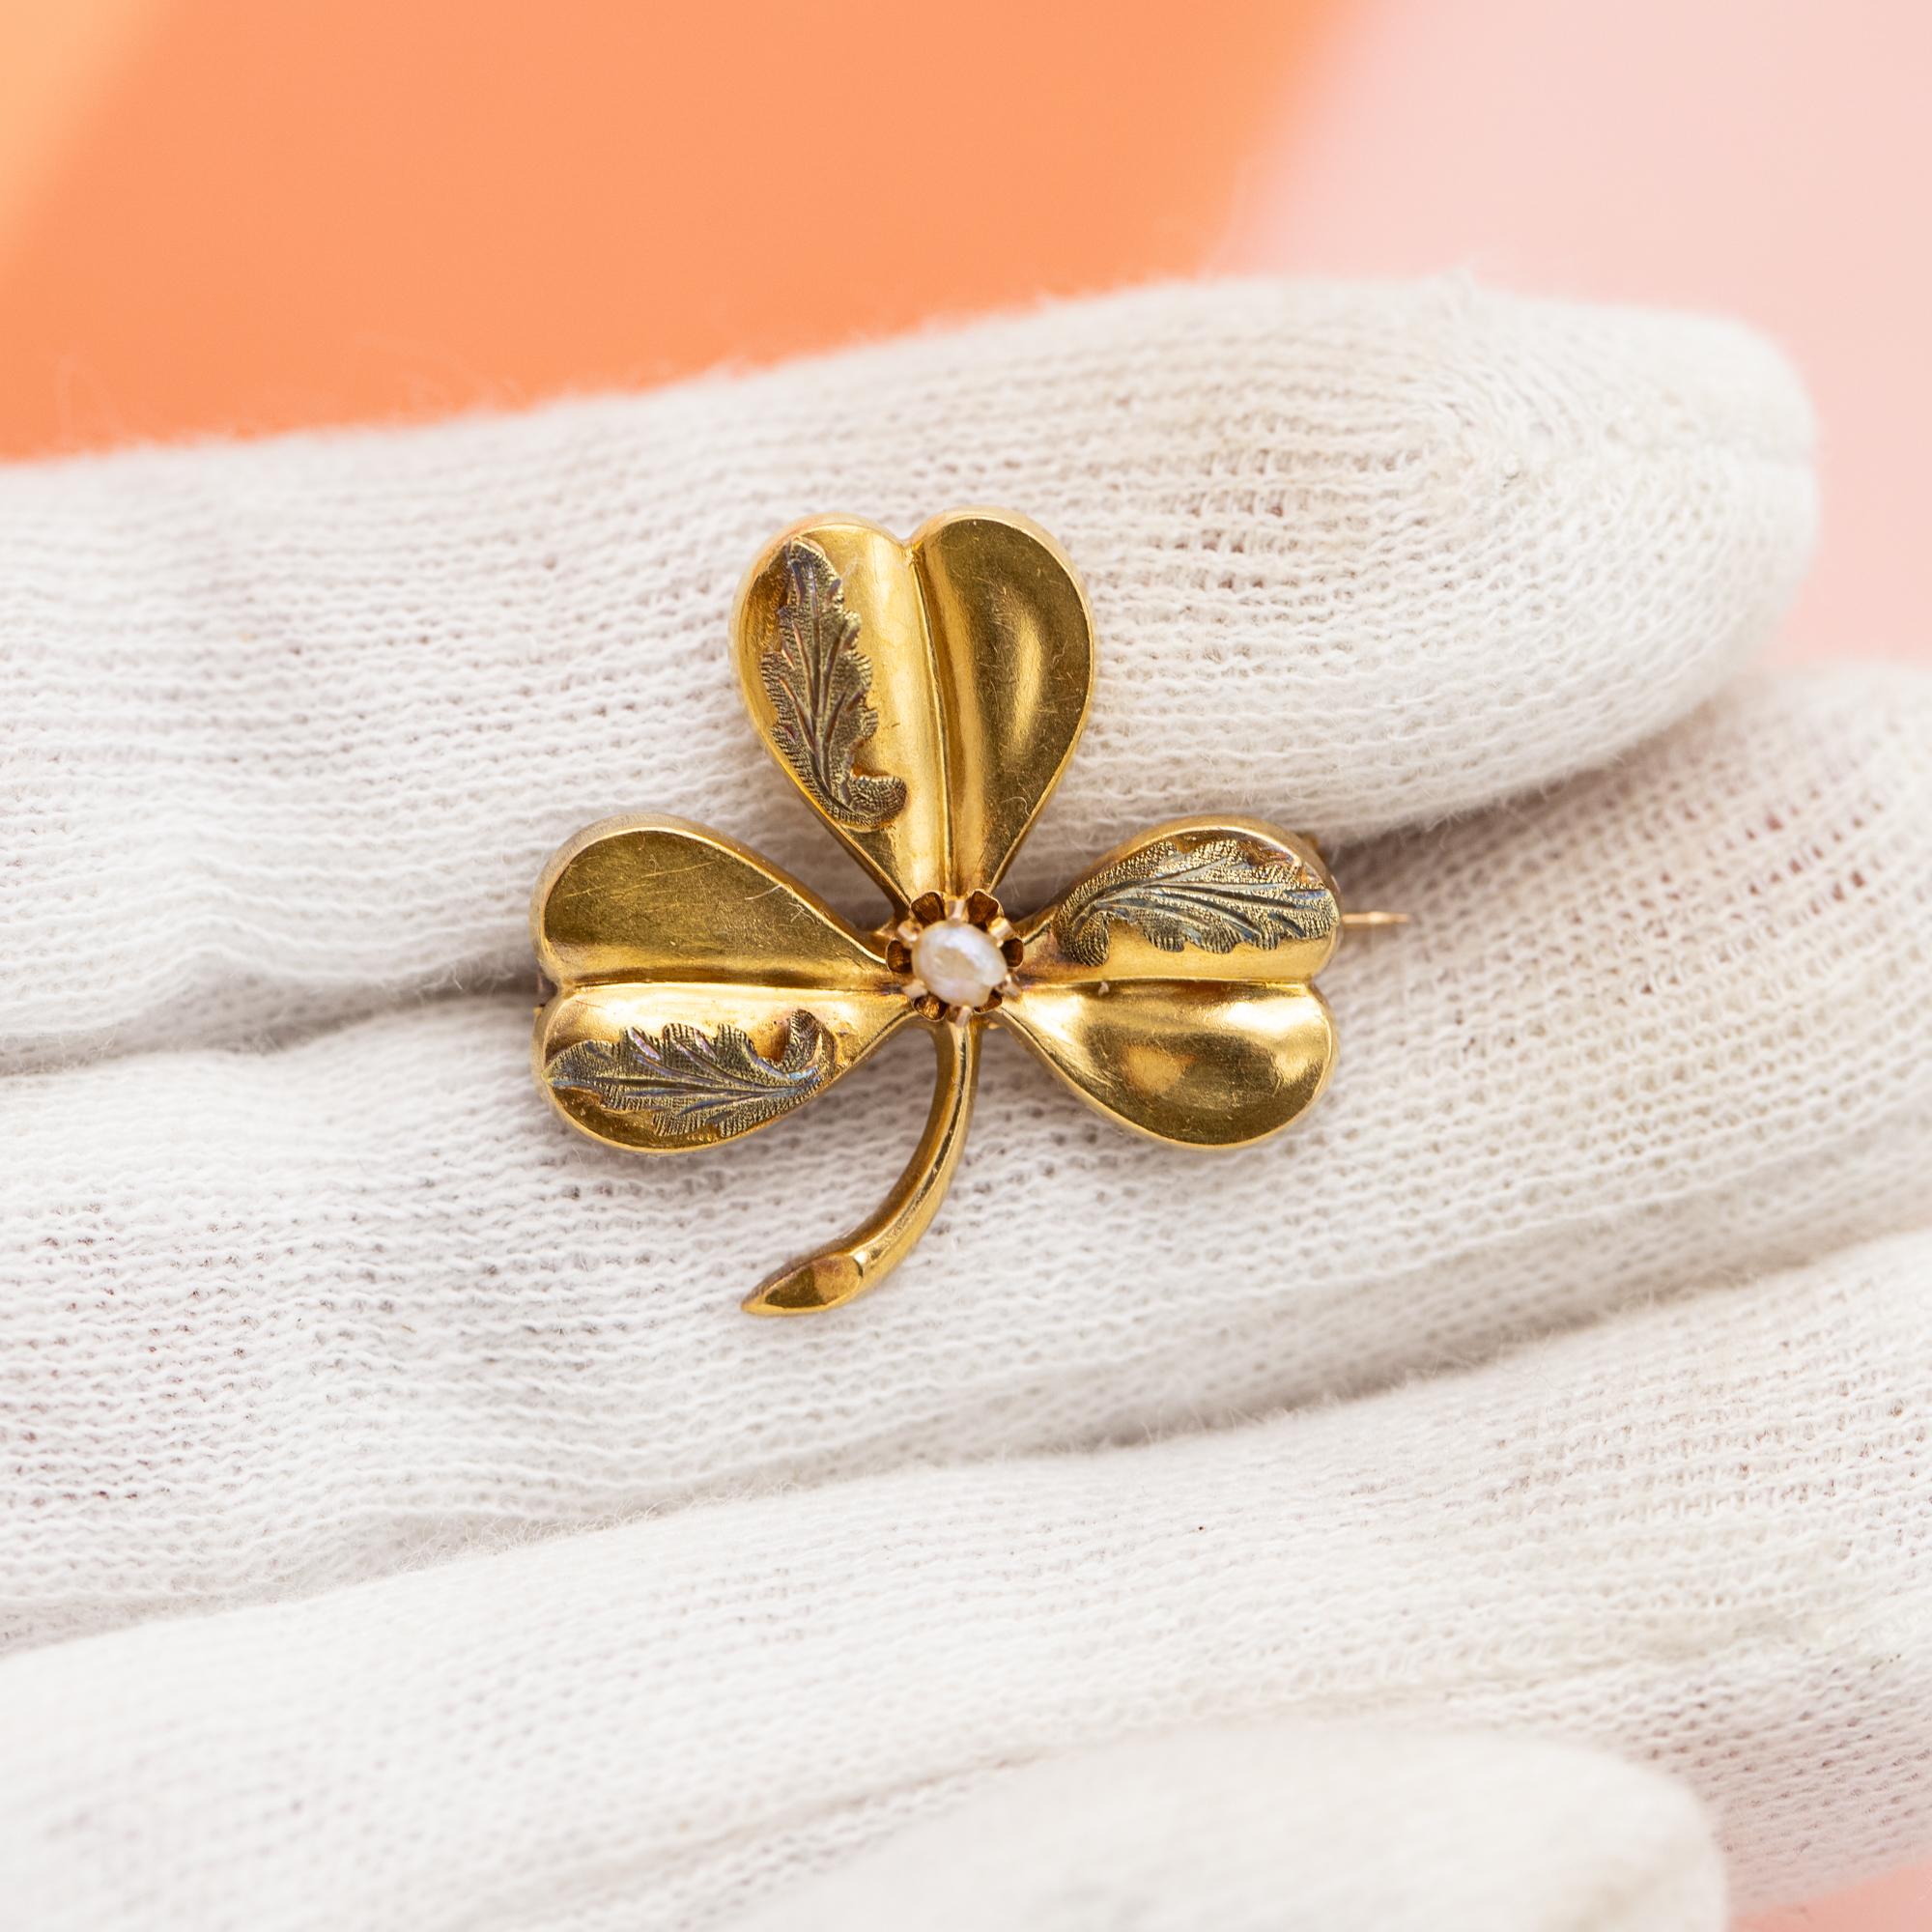 18k French Art Nouveau brooch - Victorian jewelry - clover pin - Antique luck For Sale 8